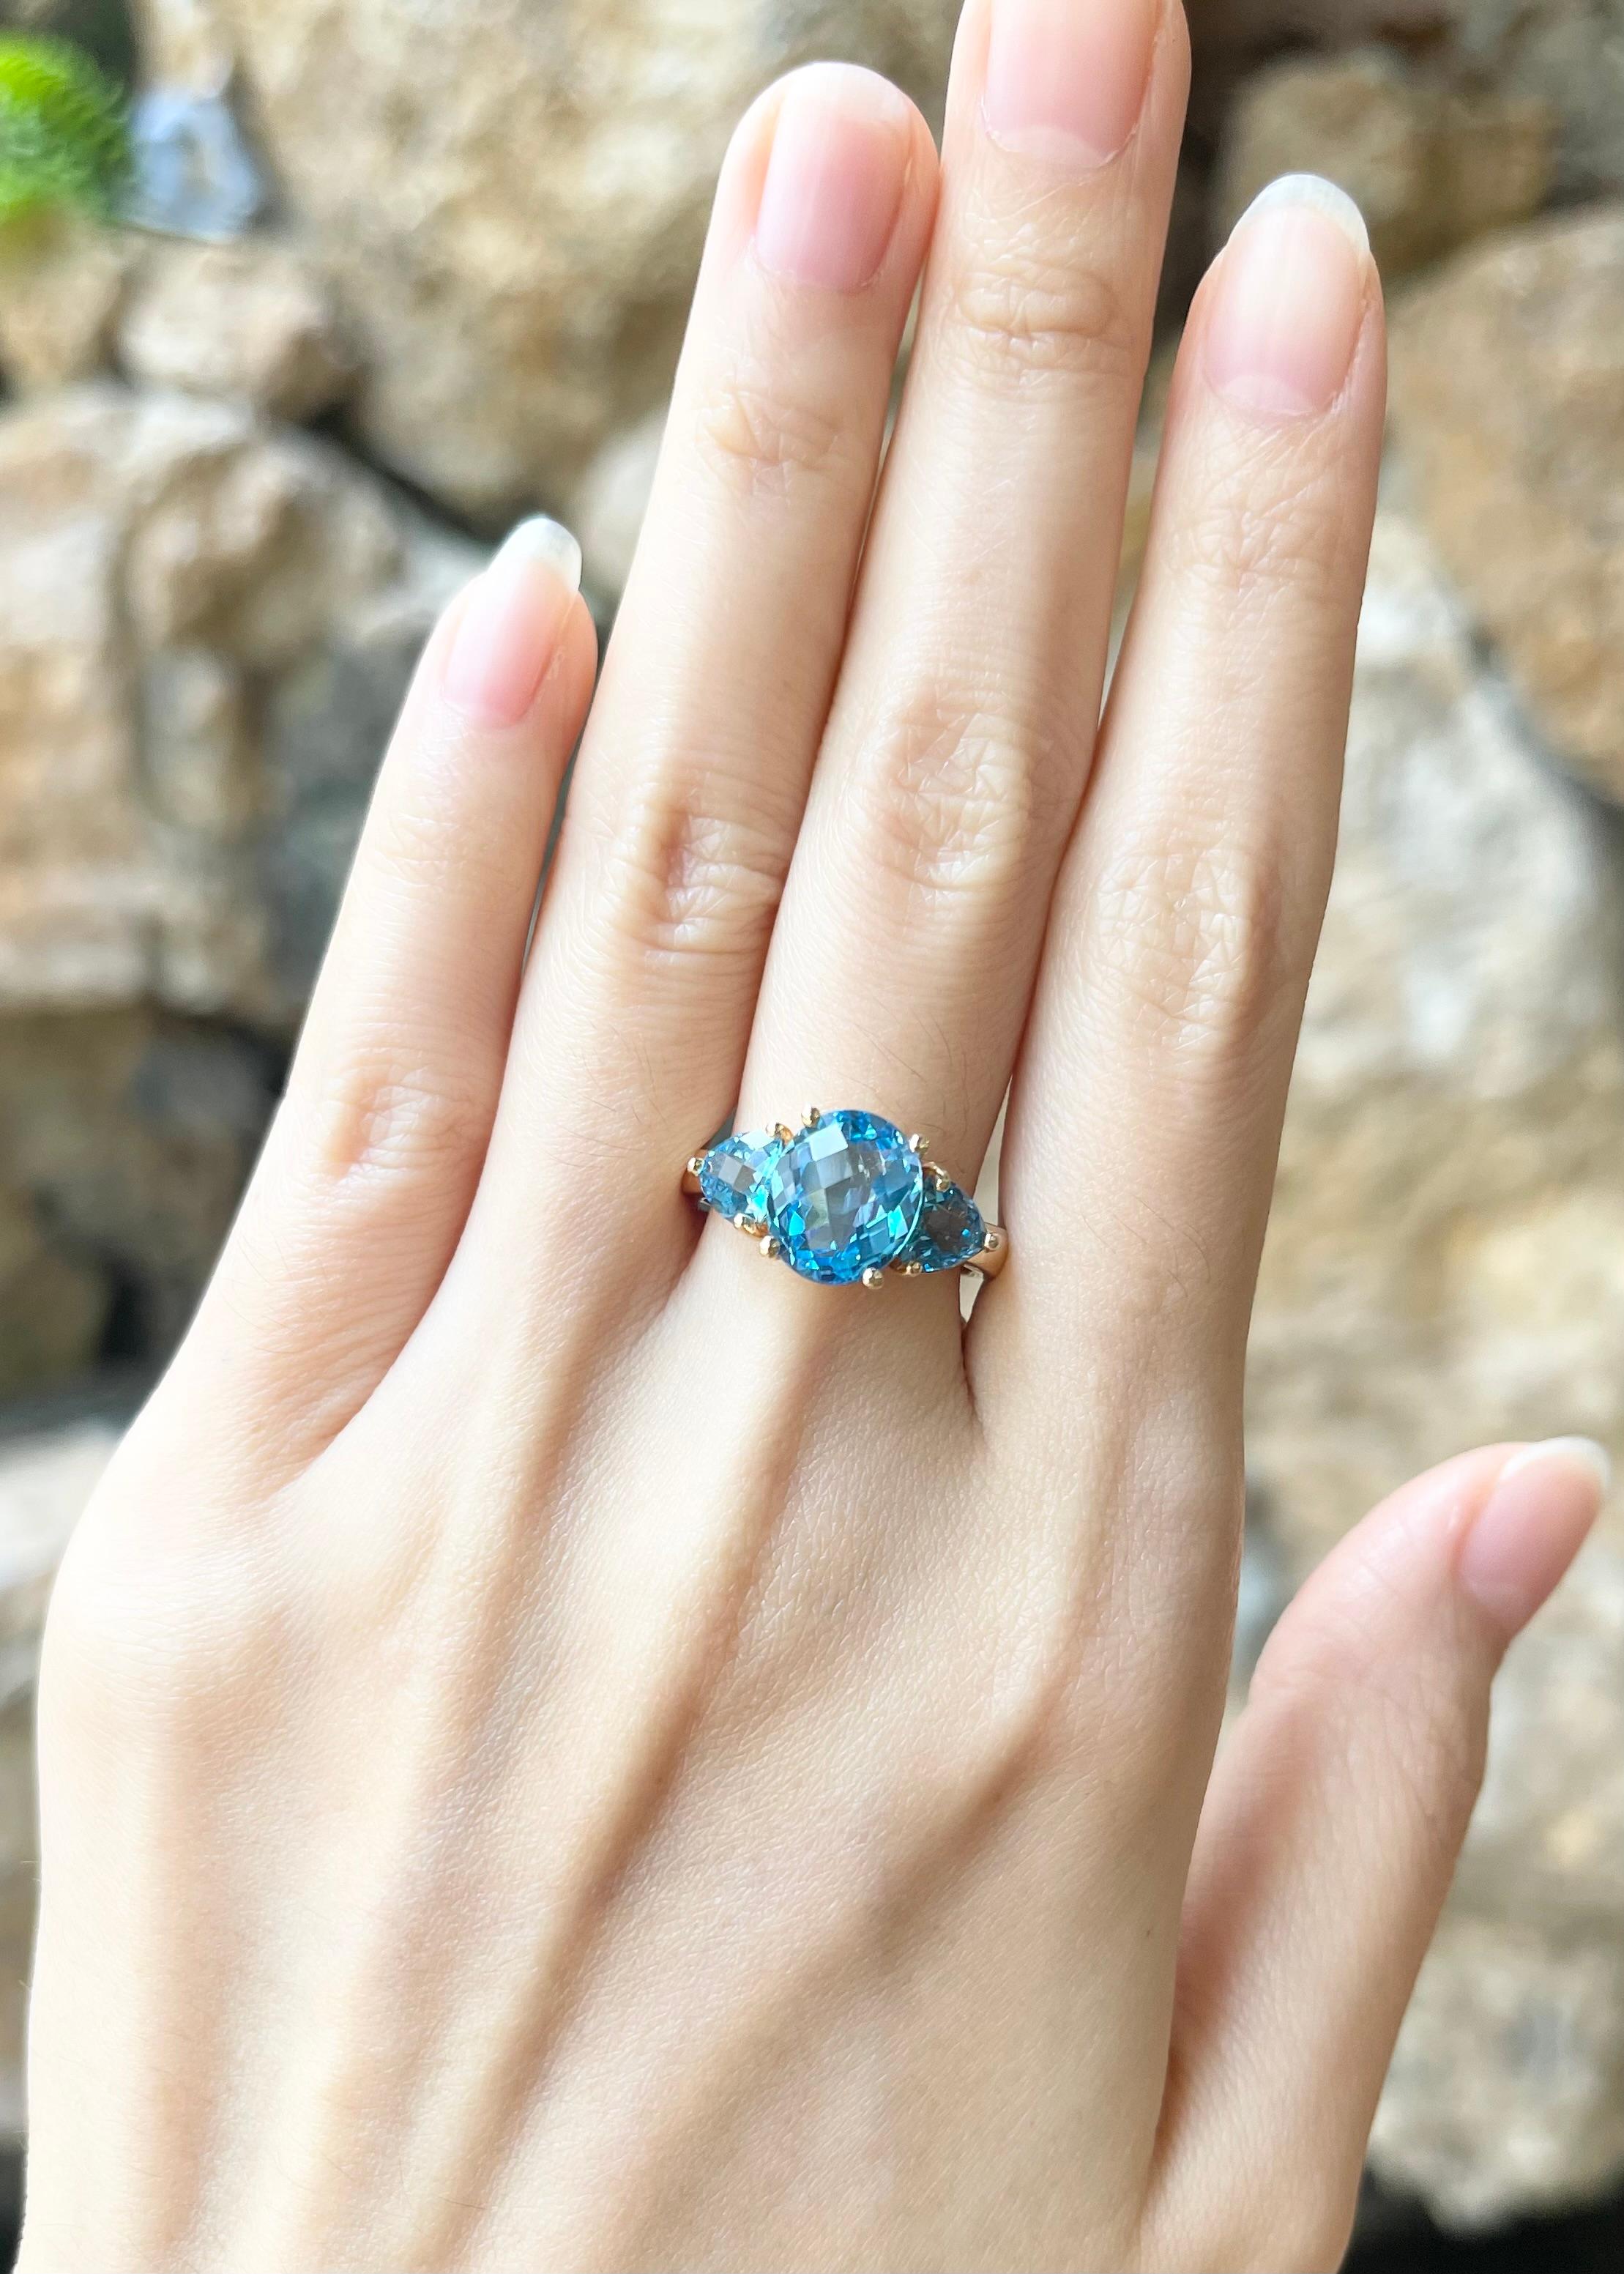 Blue Topaz 5.48 carats Ring set in 14K Gold Settings

Width:  1.8 cm 
Length: 1.0 cm
Ring Size: 56
Total Weight: 6.03 grams

